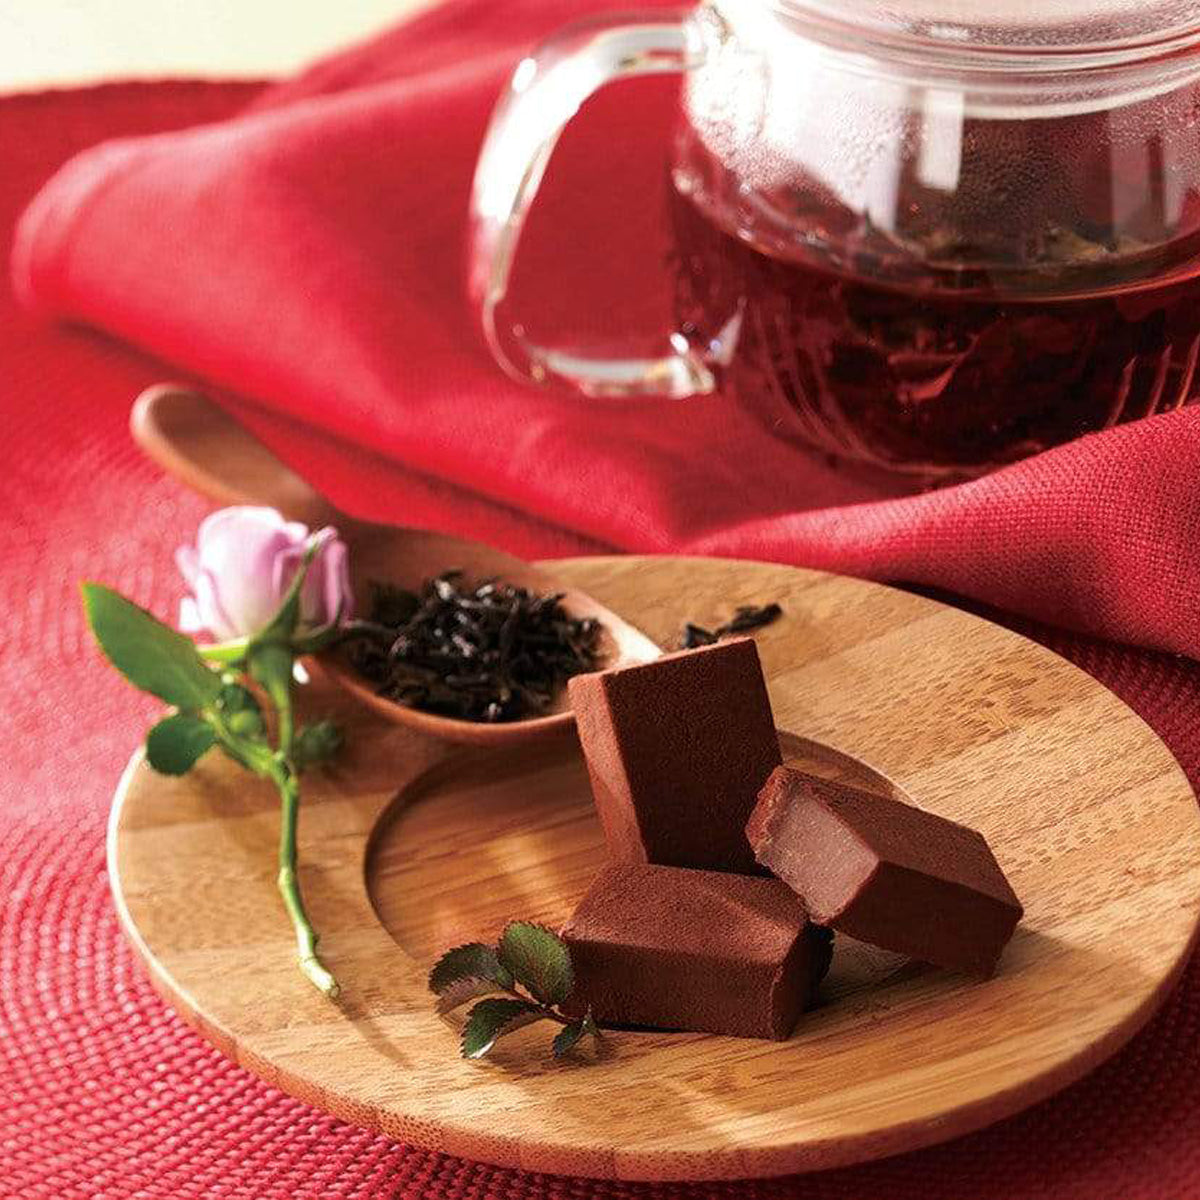 ROYCE' Chocolate - Nama Chocolate "Darjeeling" - Image shows brown blocks of chocolate on a brown wooden plate. Accents include a pink rose with green stem, a wooden spoon with tea shavings, a red cloth background, and a clear teapot filled with amber-hued tea.